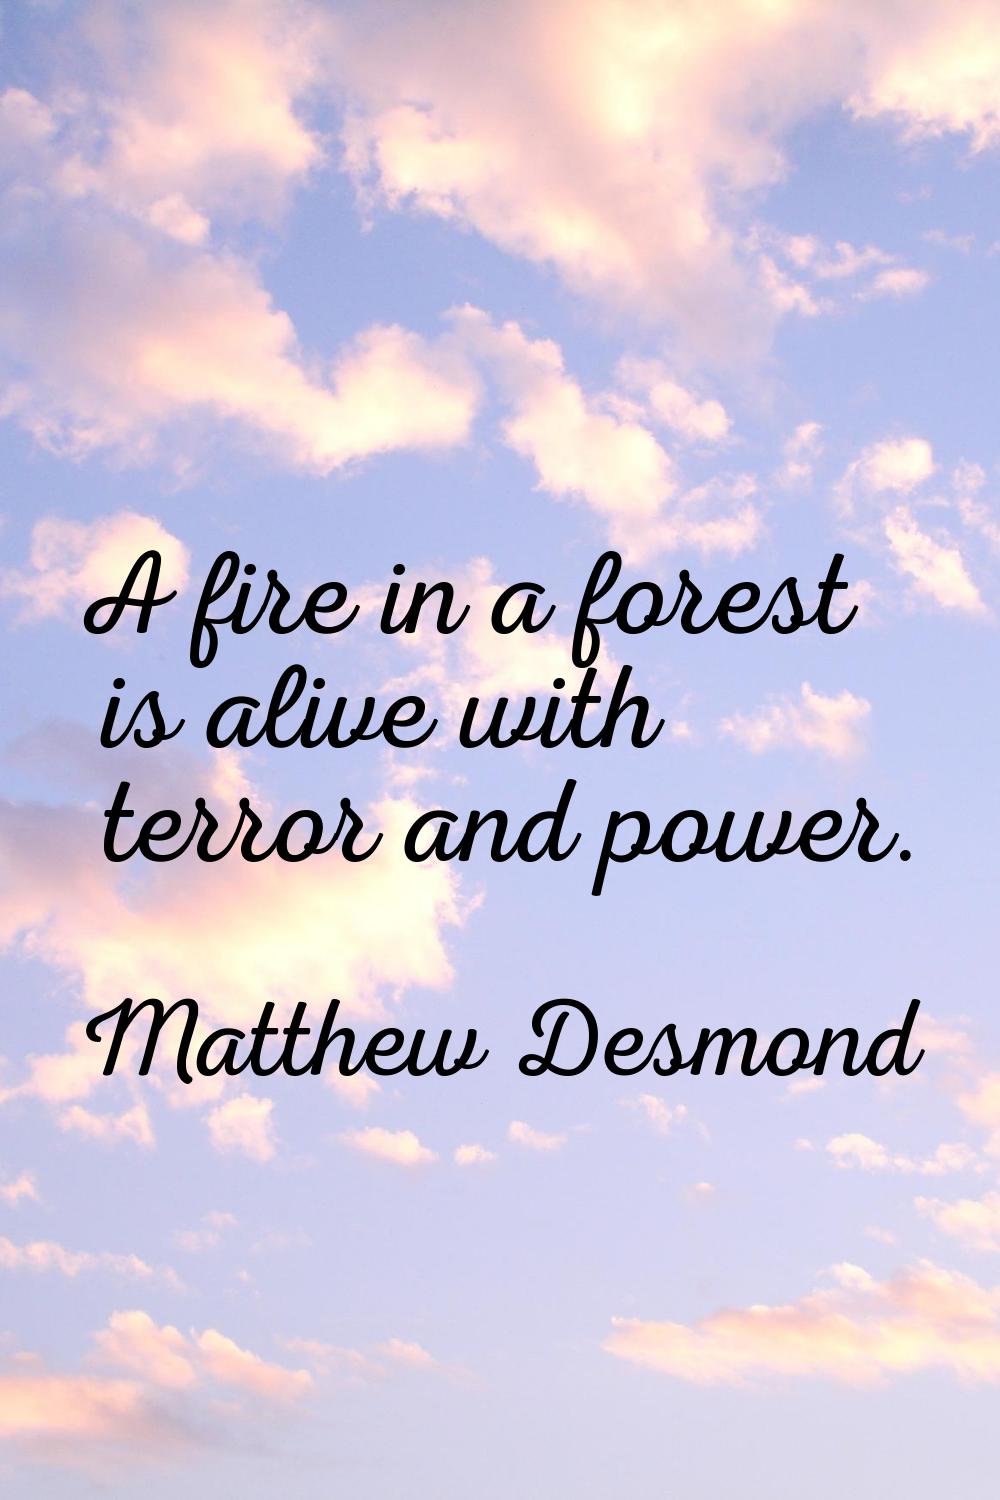 A fire in a forest is alive with terror and power.